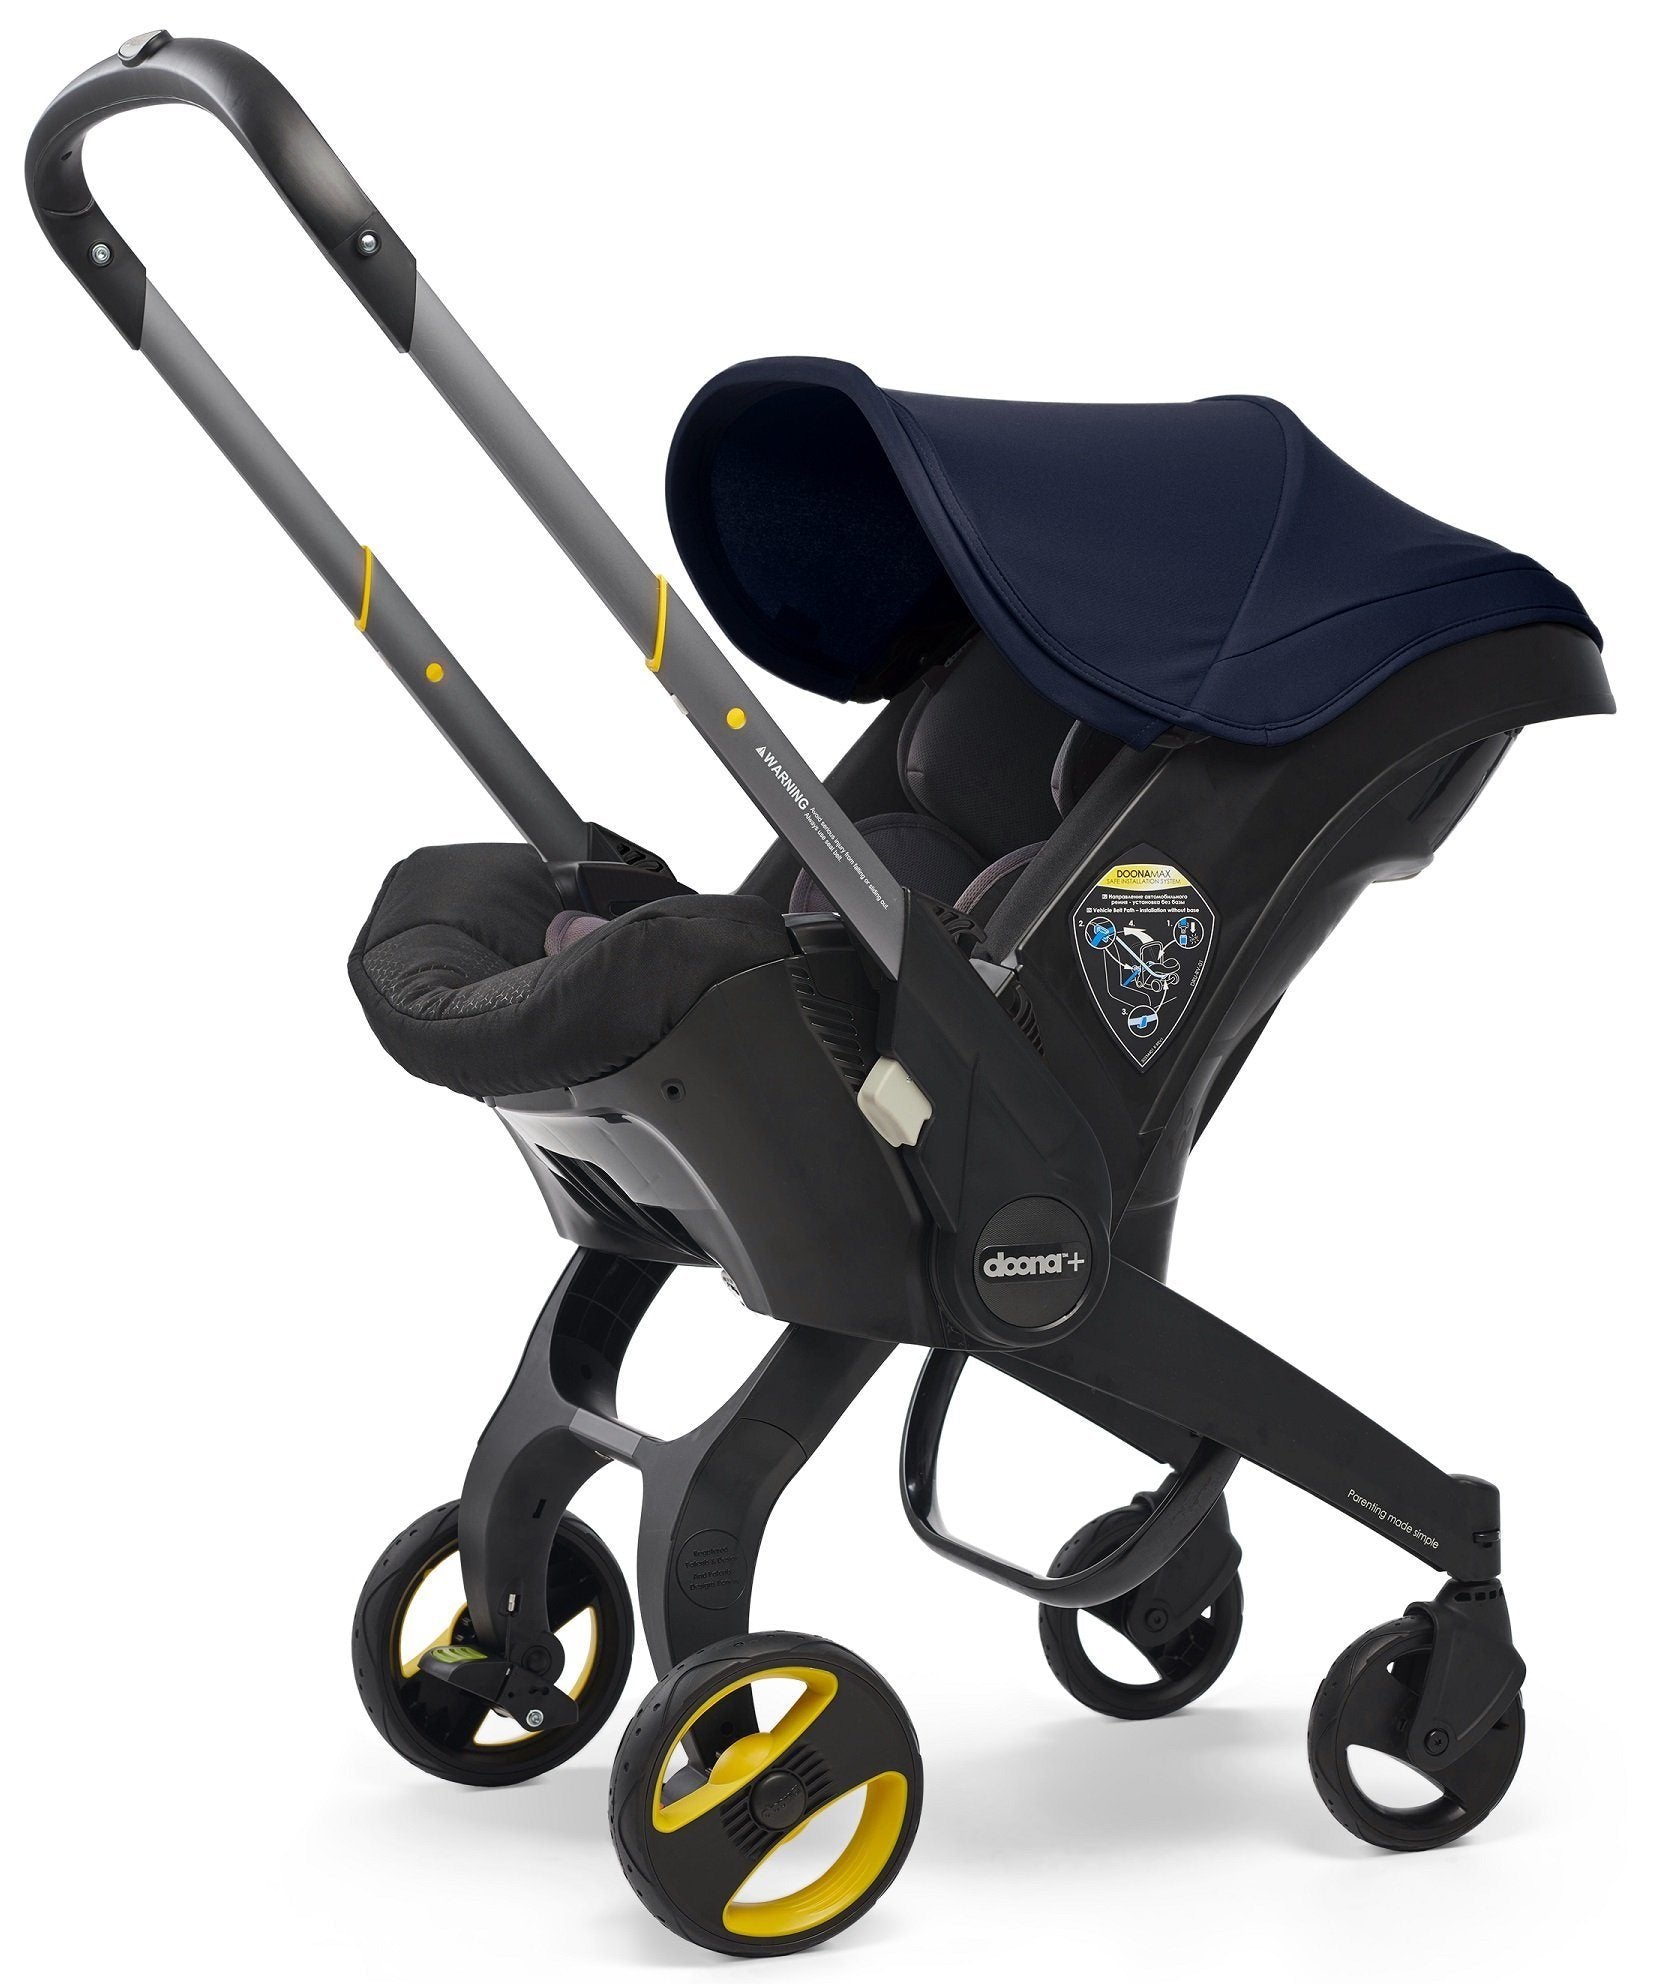 when can baby use stroller without car seat